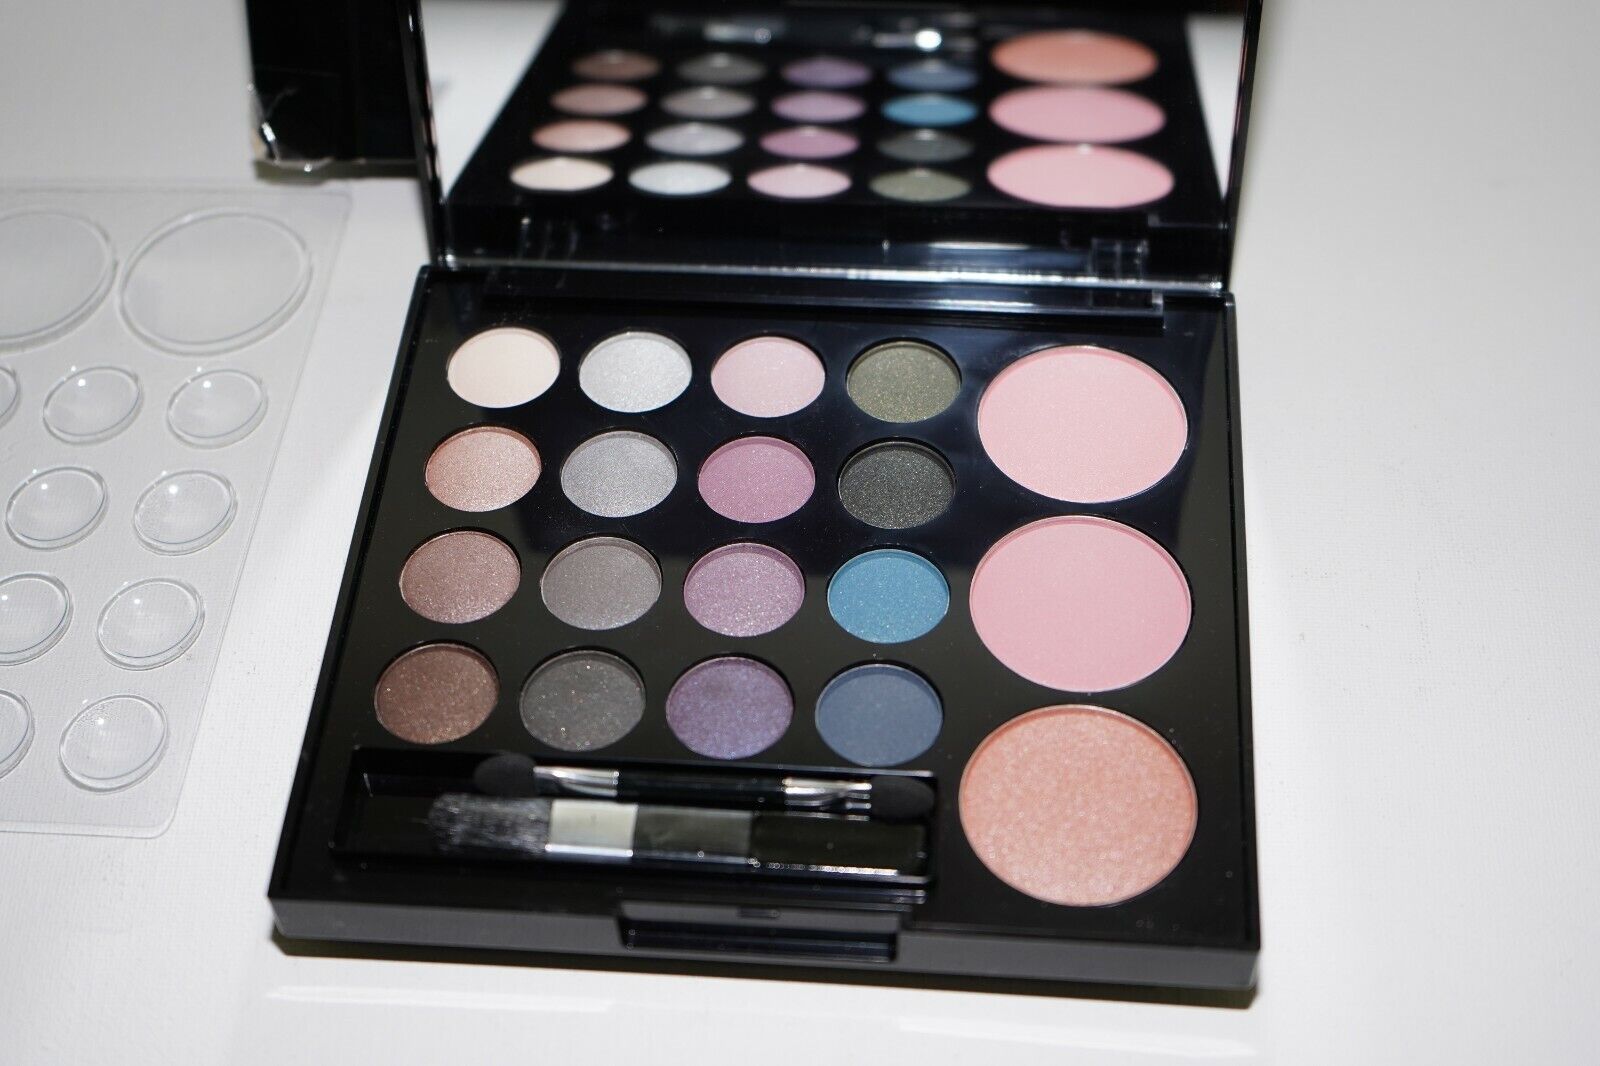 Saks Raleigh Mall Fifth Ave Makeup Palette Brand Traveler New Eyes Color Sacramento Mall with